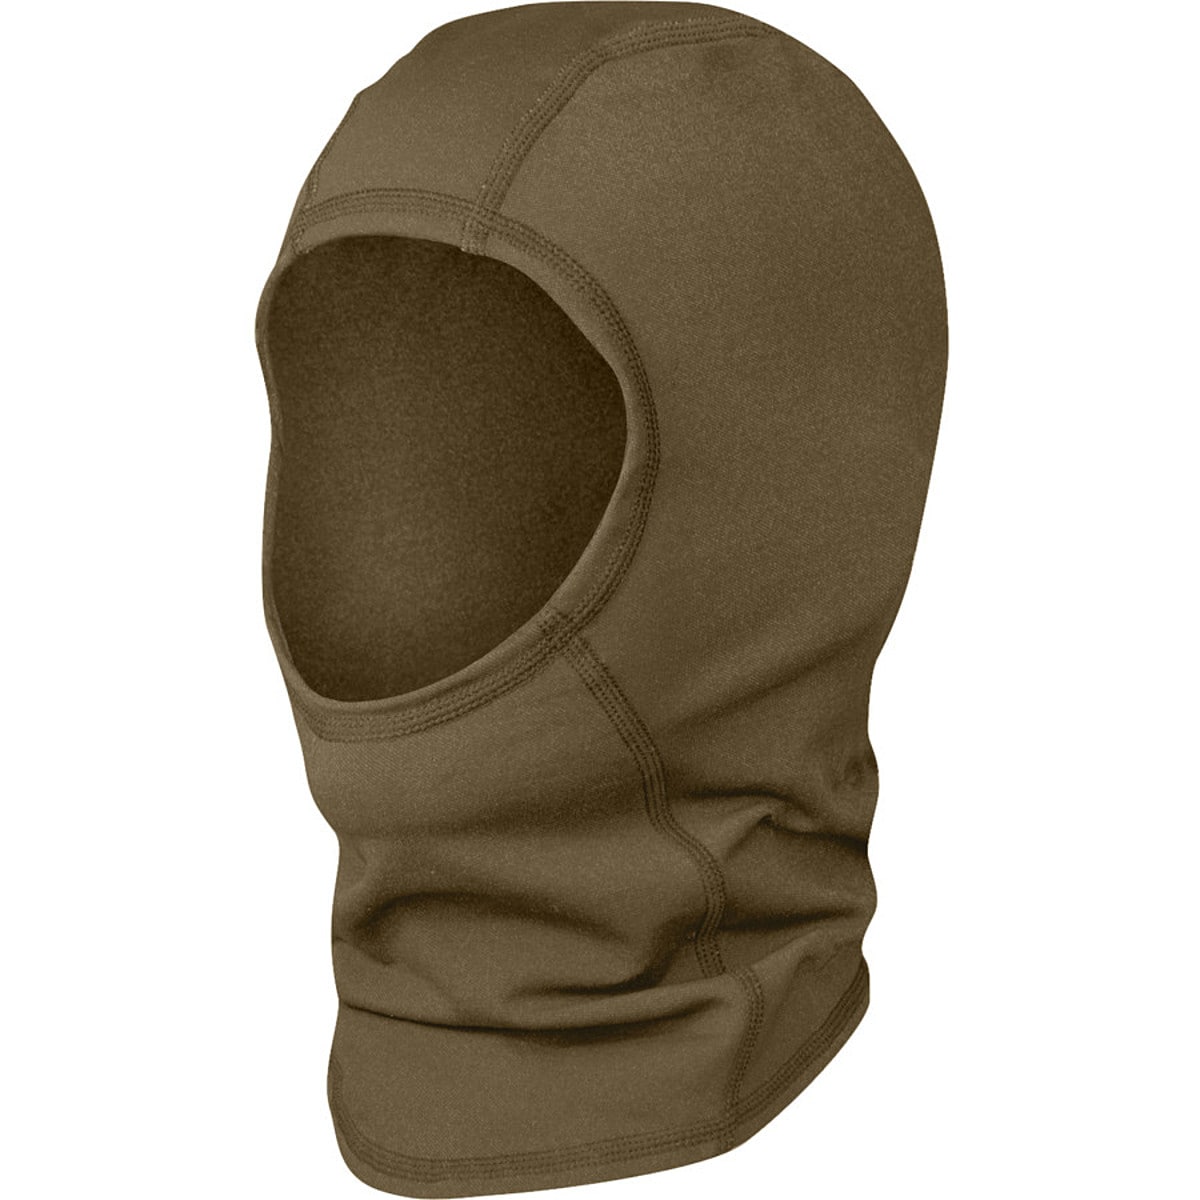 Outdoor Research Option Balaclava Coyote